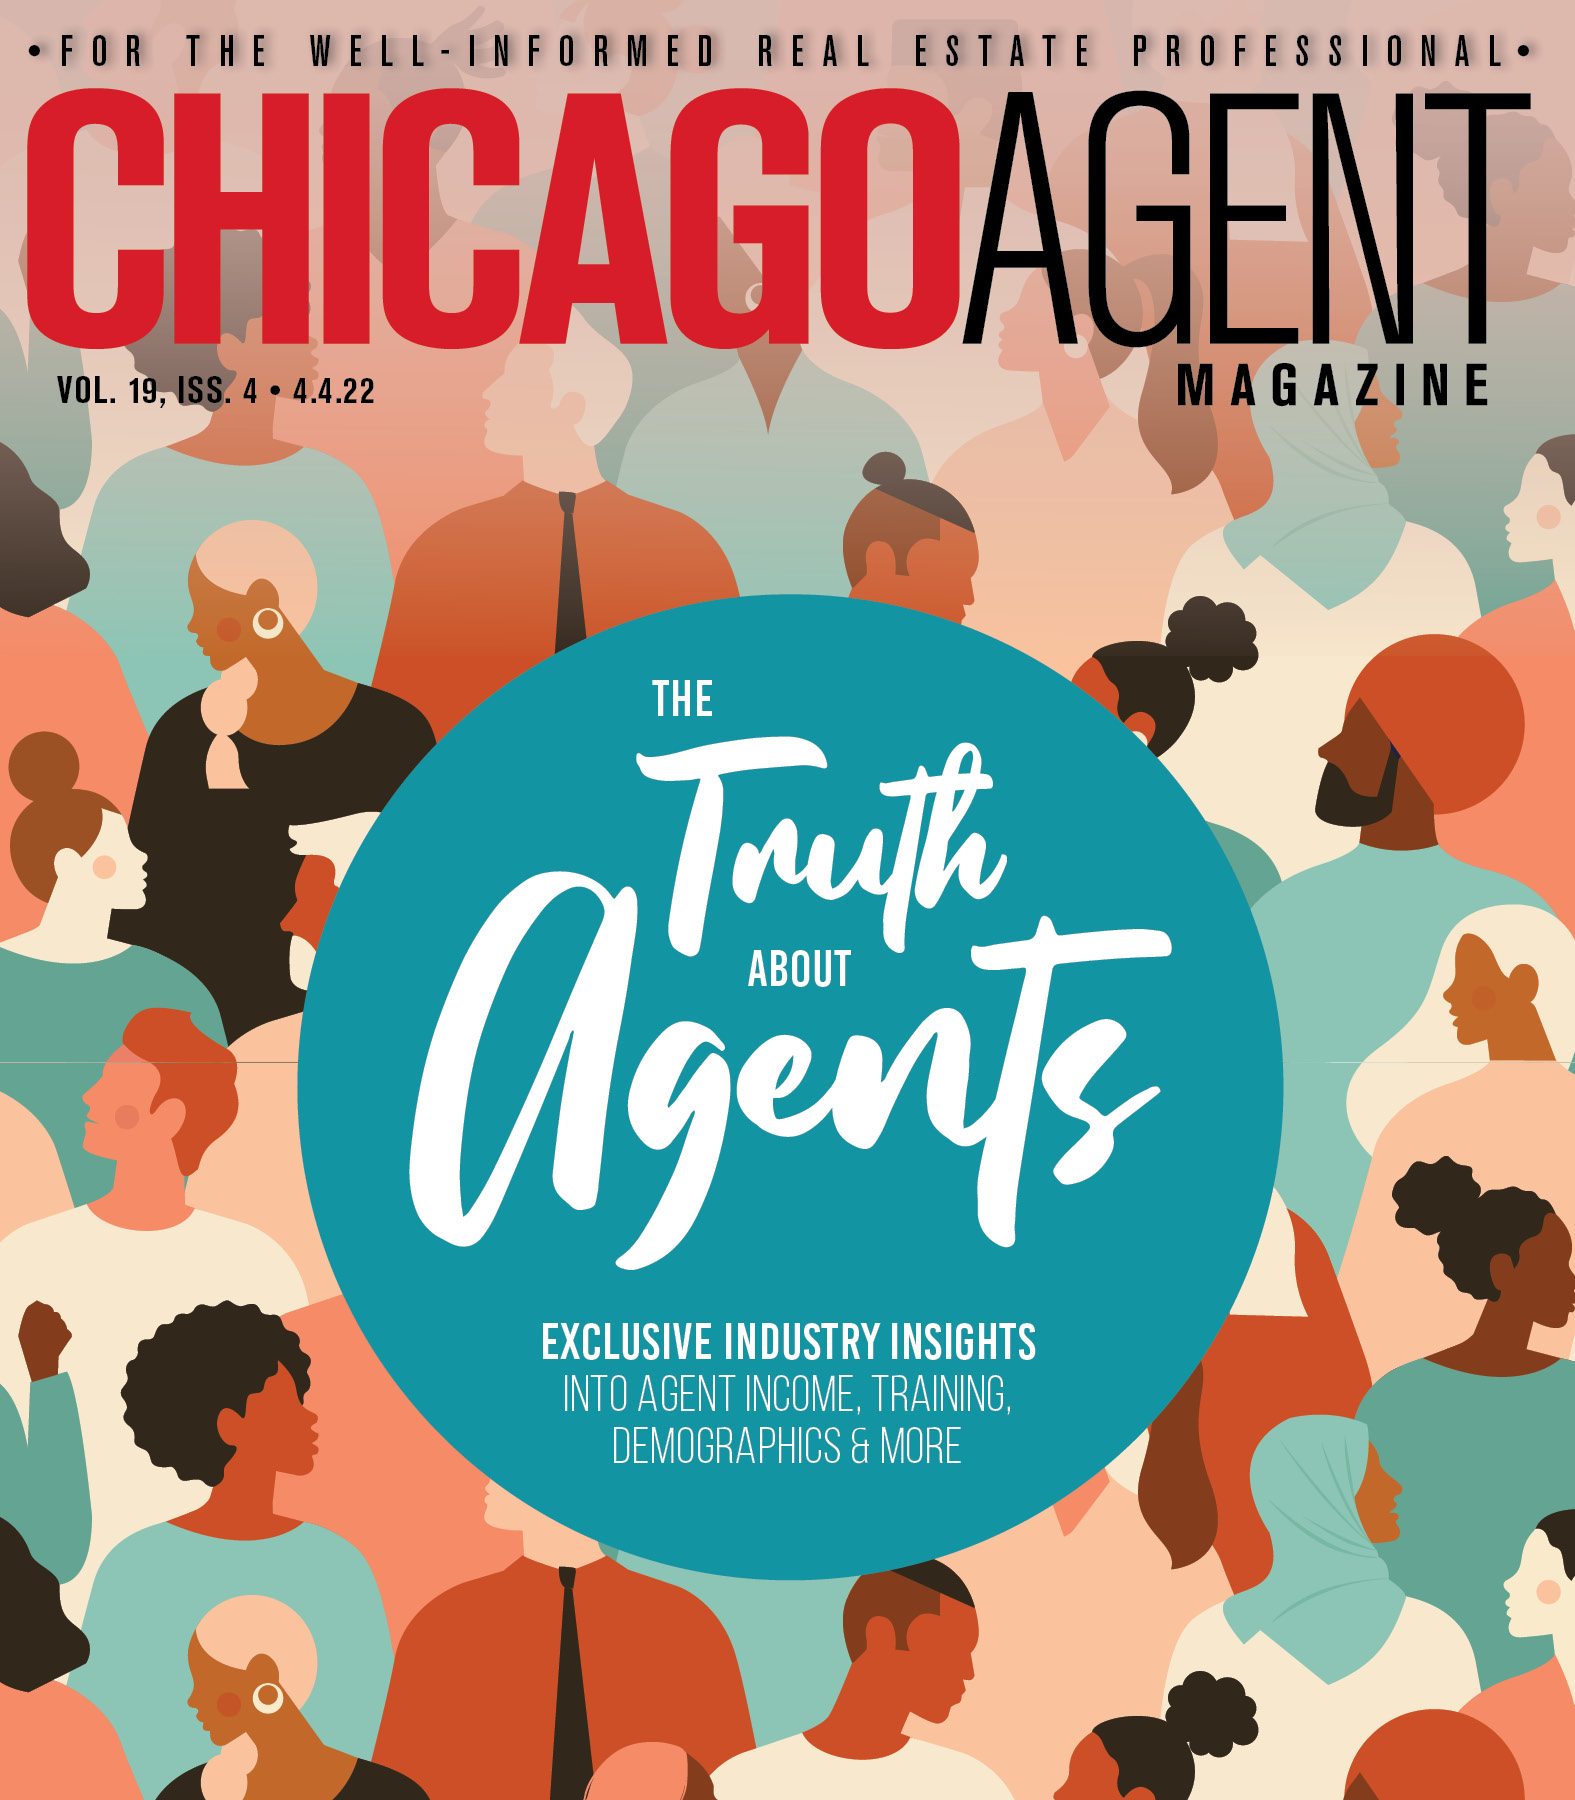 Major real estate brands open option for agents to leave NAR - Chicago  Agent Magazine National News